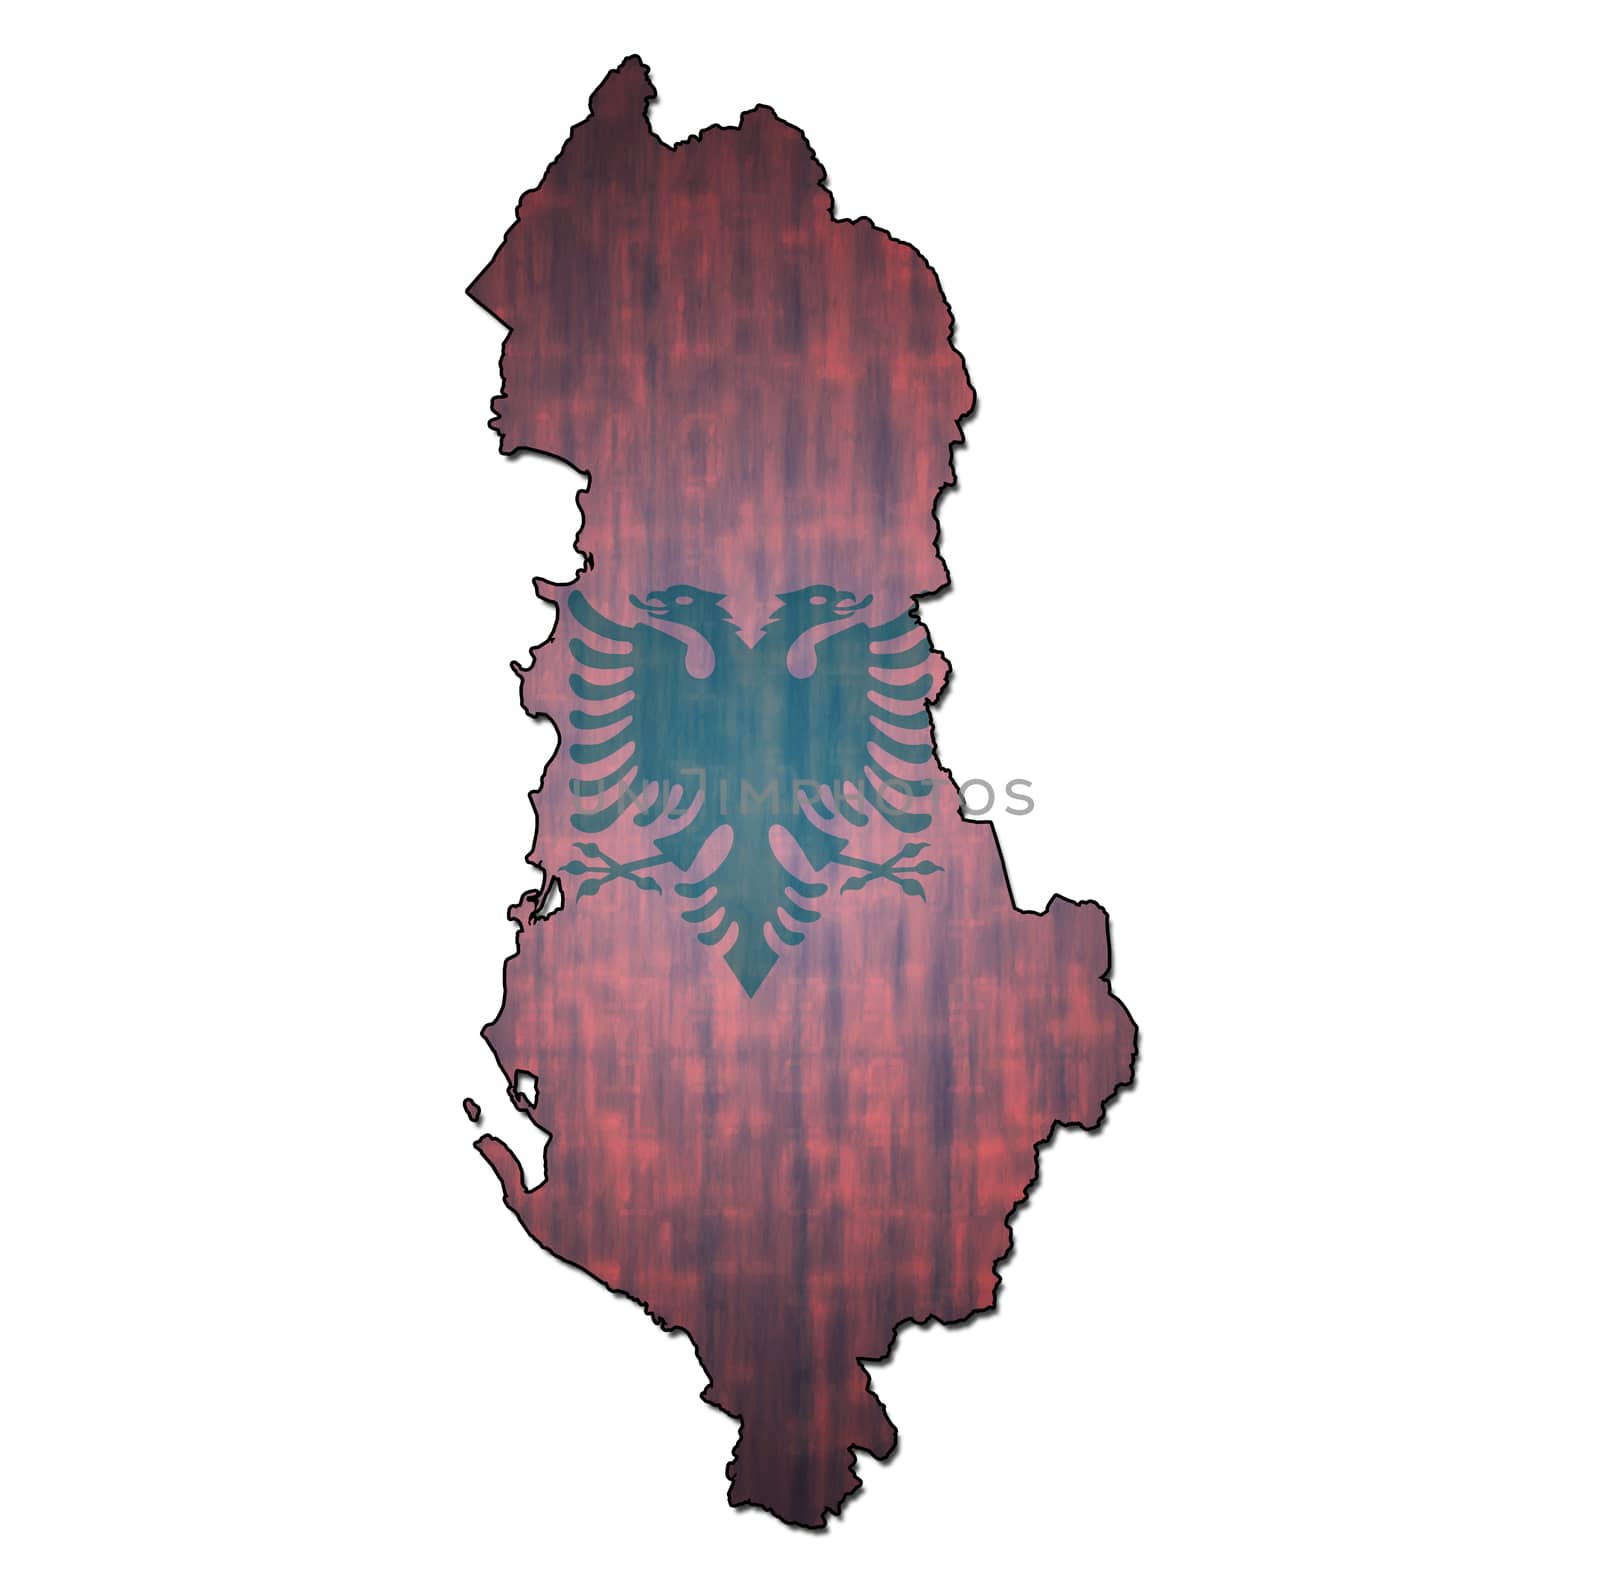 albania territory with flag by michal812